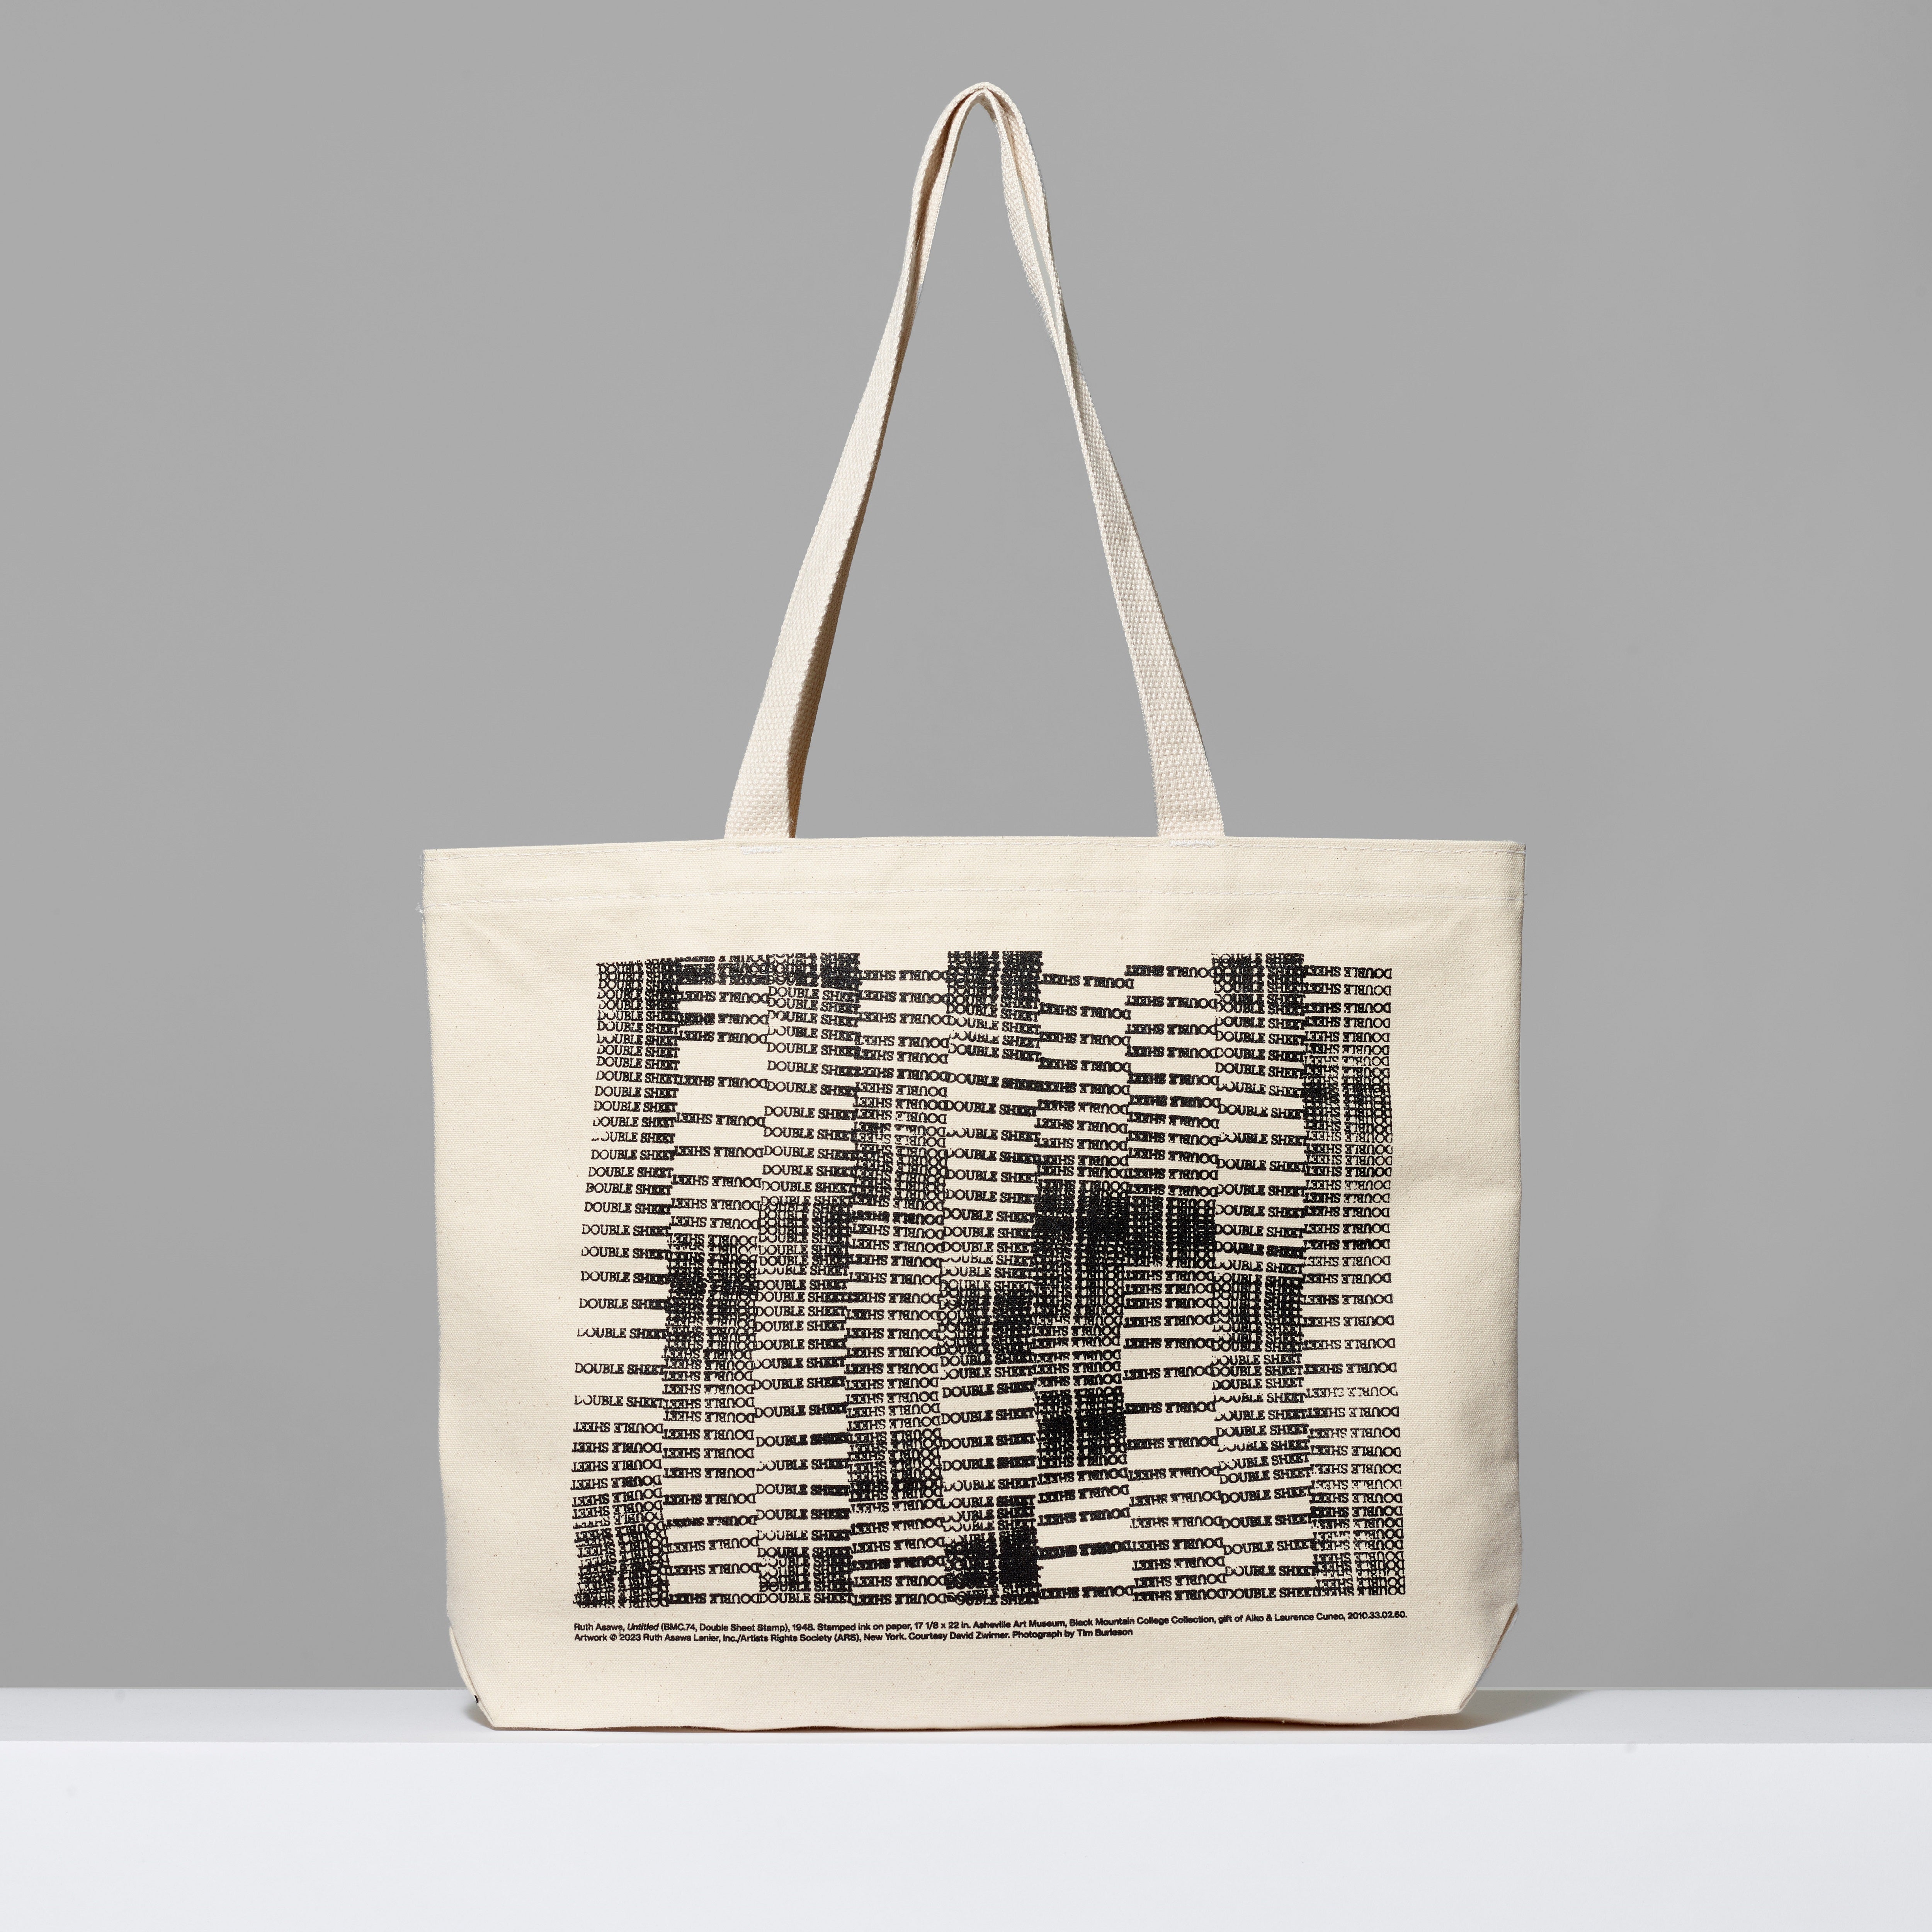 100% cotton Ruth Asawa Through Line Tote featuring Untitled (BMC .74 Double Sheet Stamp). Measures 18" x 14". 3.5" gusset, 11" handles.